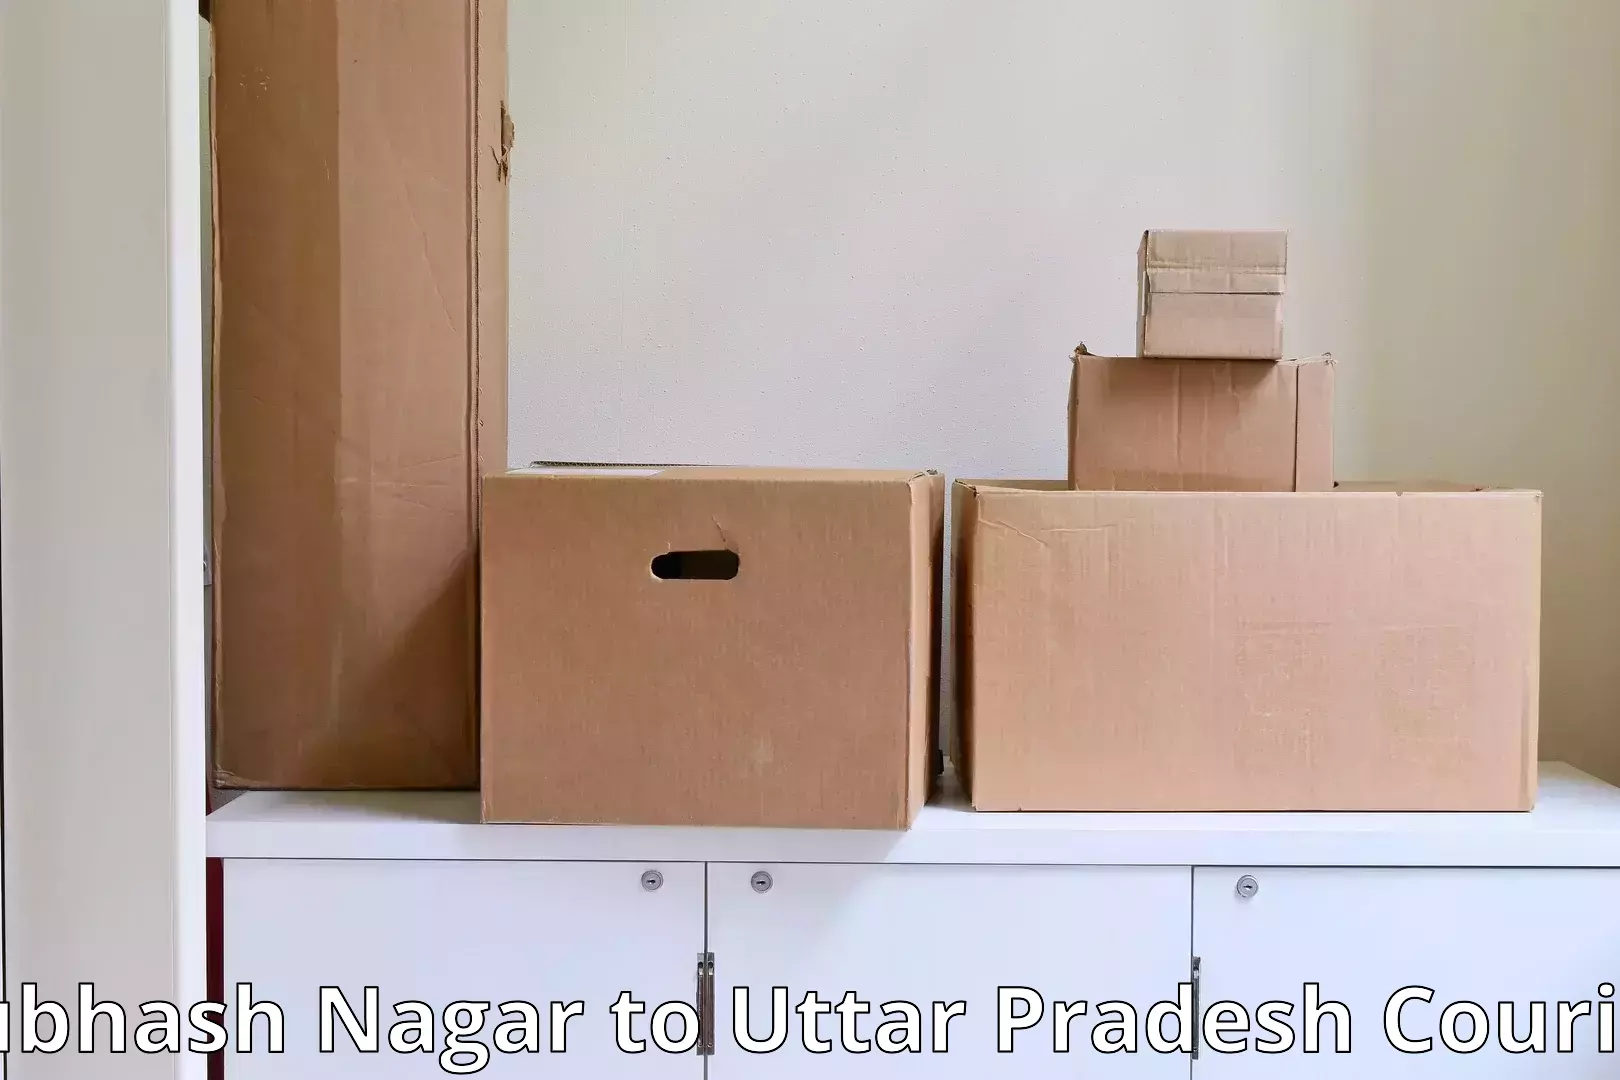 Specialized moving company Subhash Nagar to Rampur